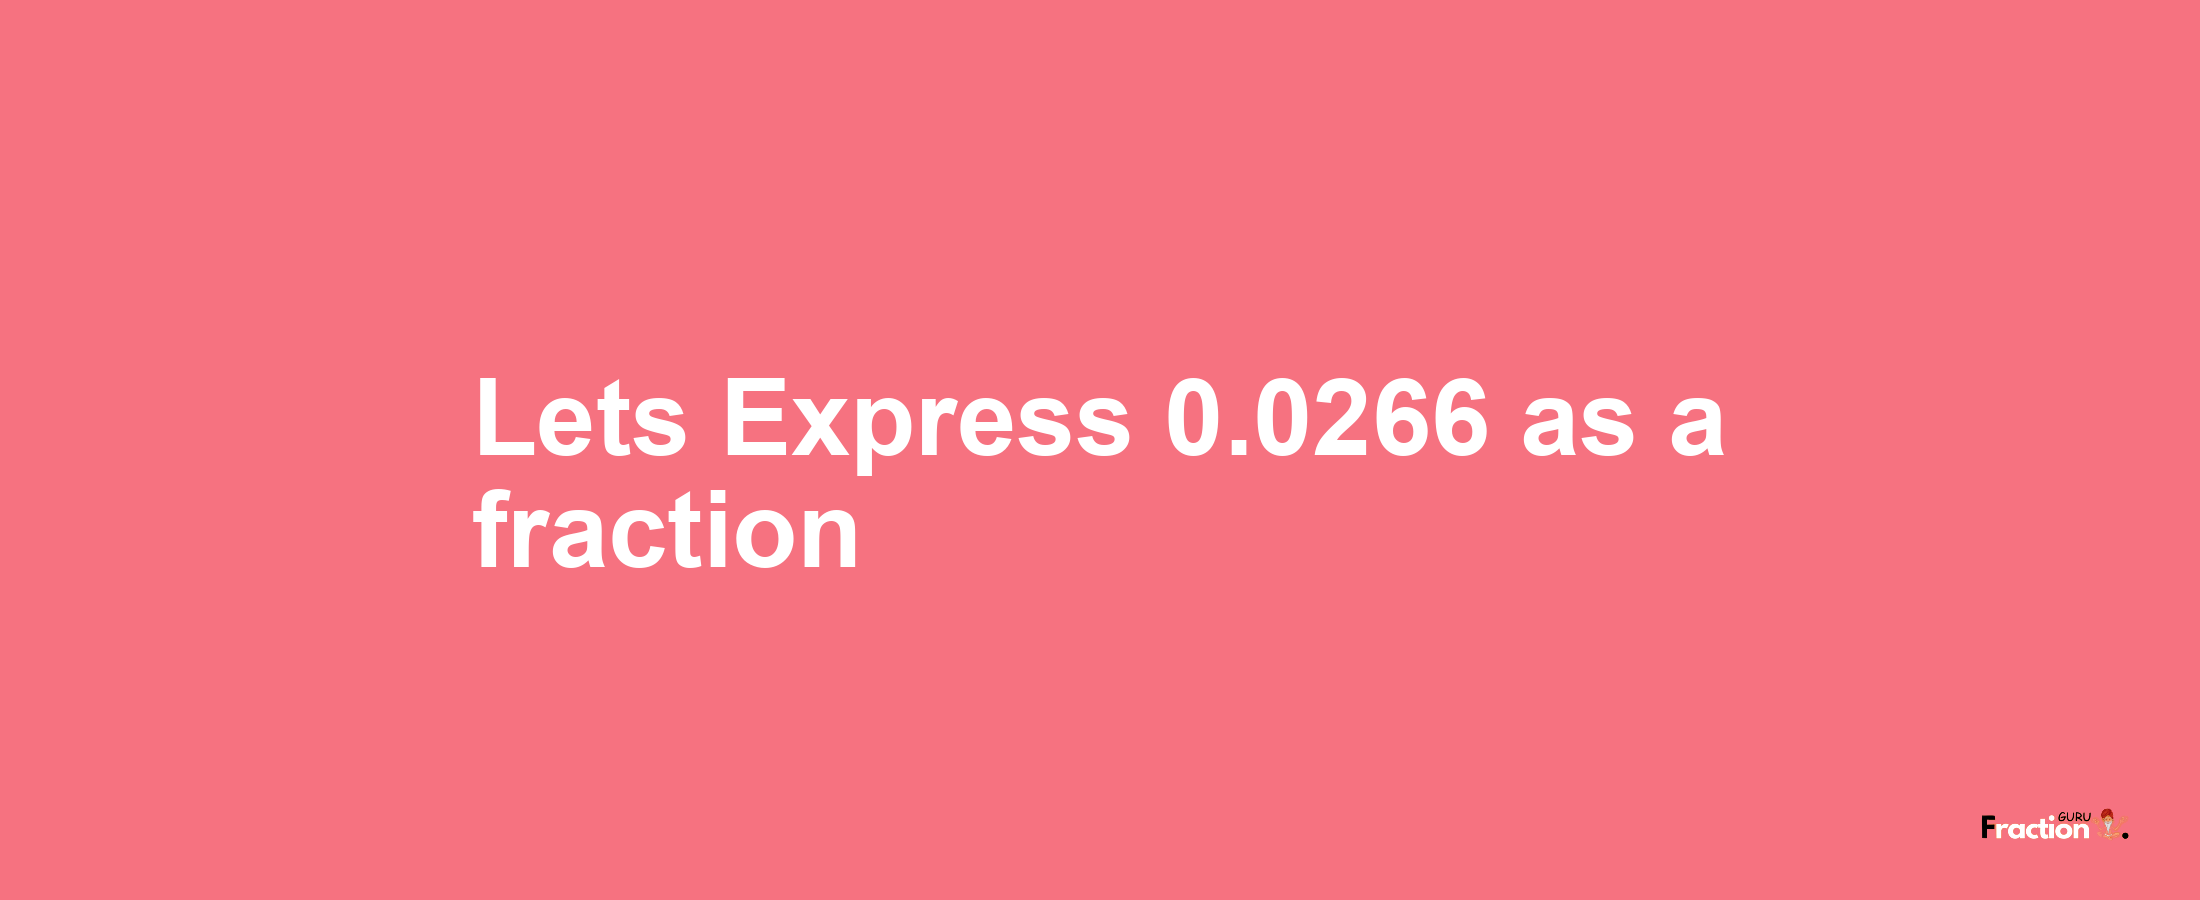 Lets Express 0.0266 as afraction